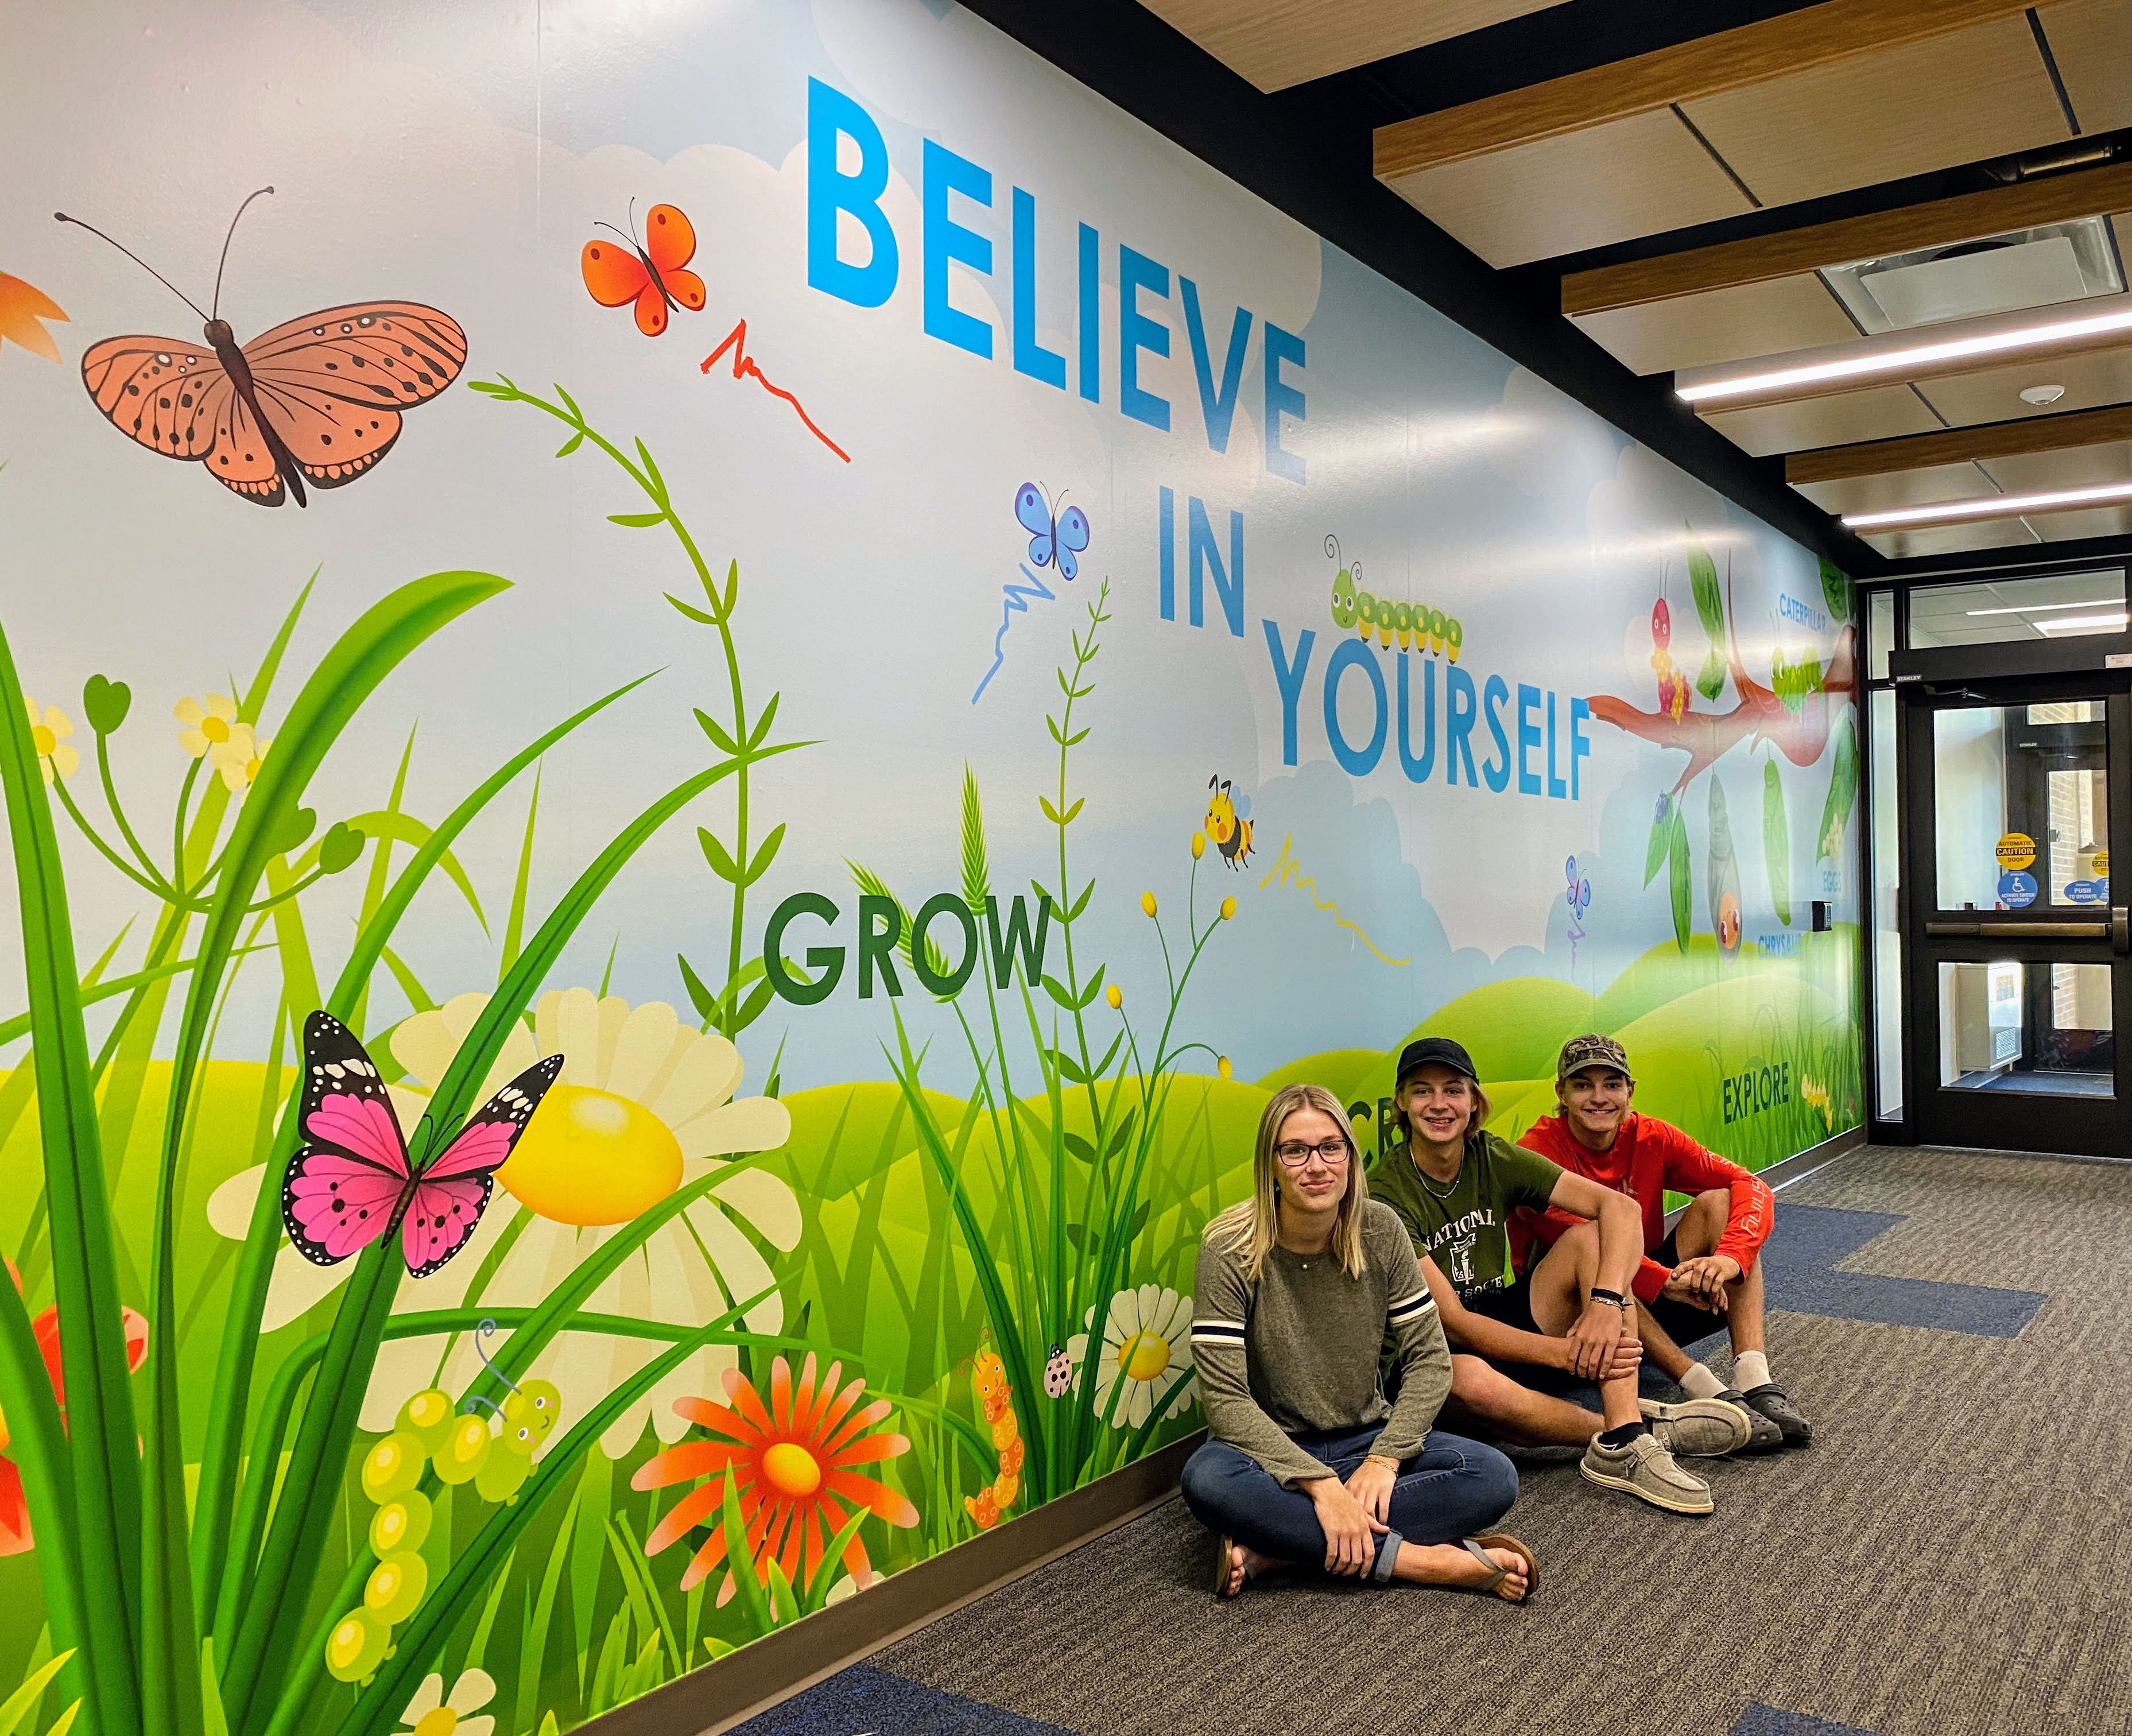 Digital graphic mural installed by students at Meadow View Primary